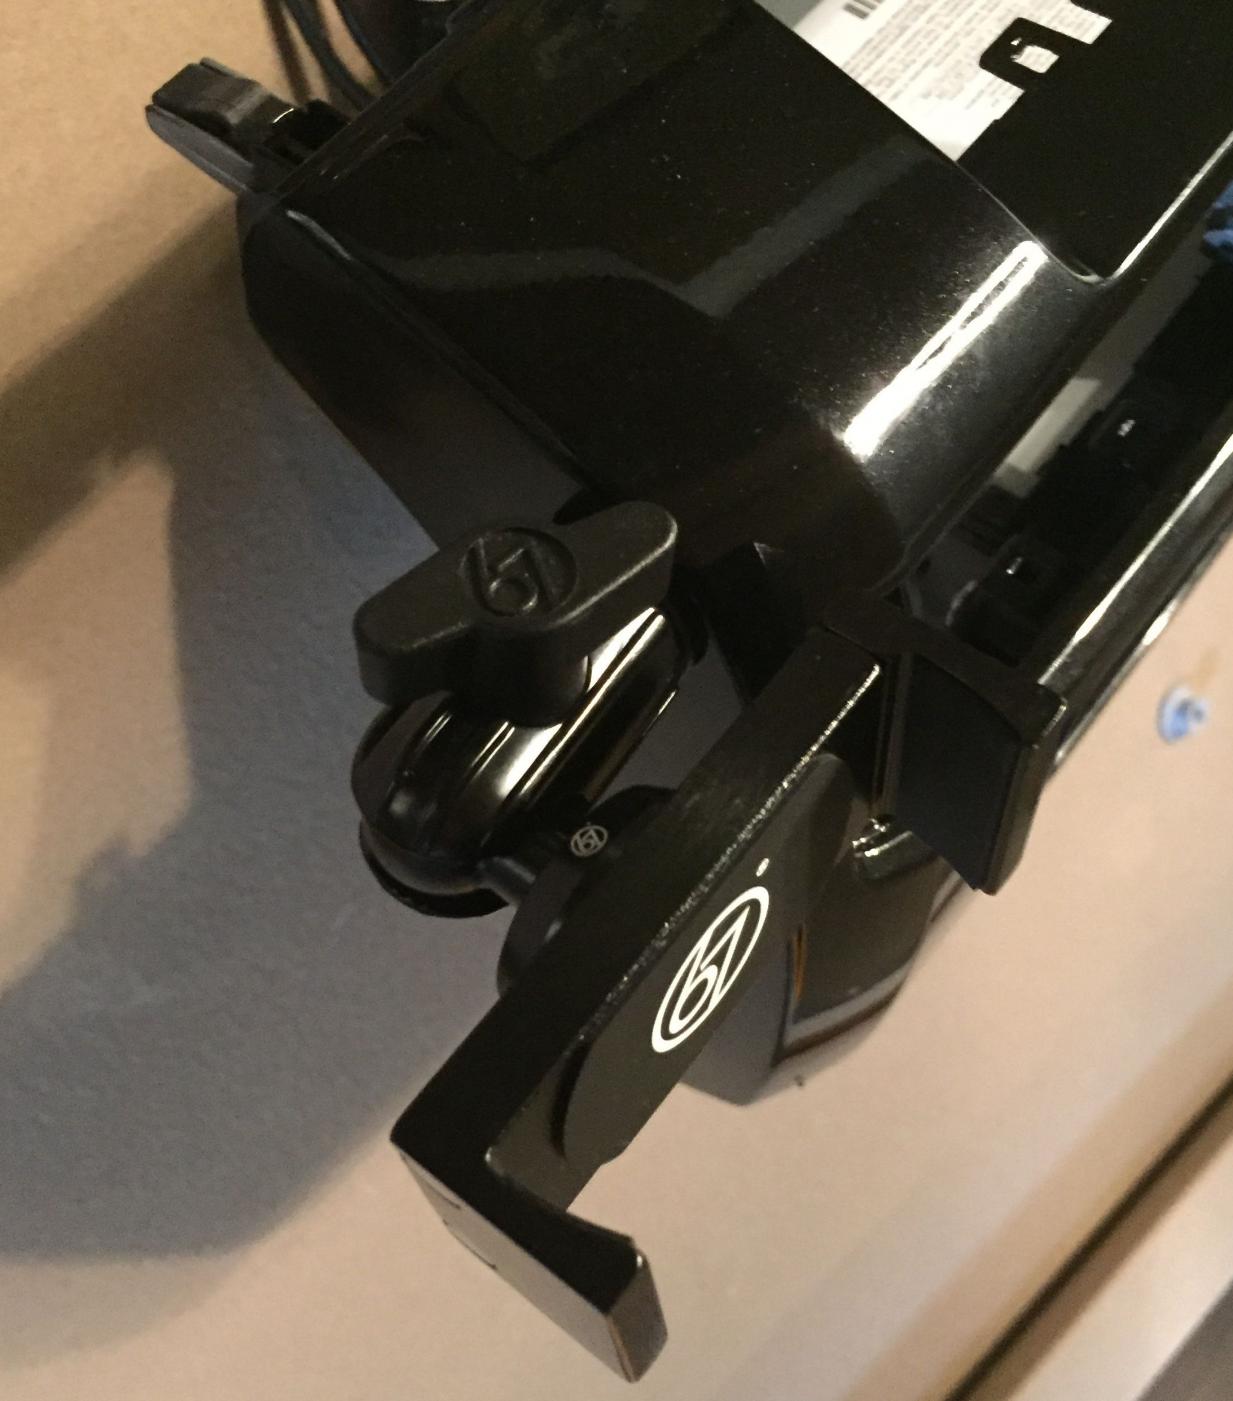 2019 Current phone mount solutions?-9-jpg